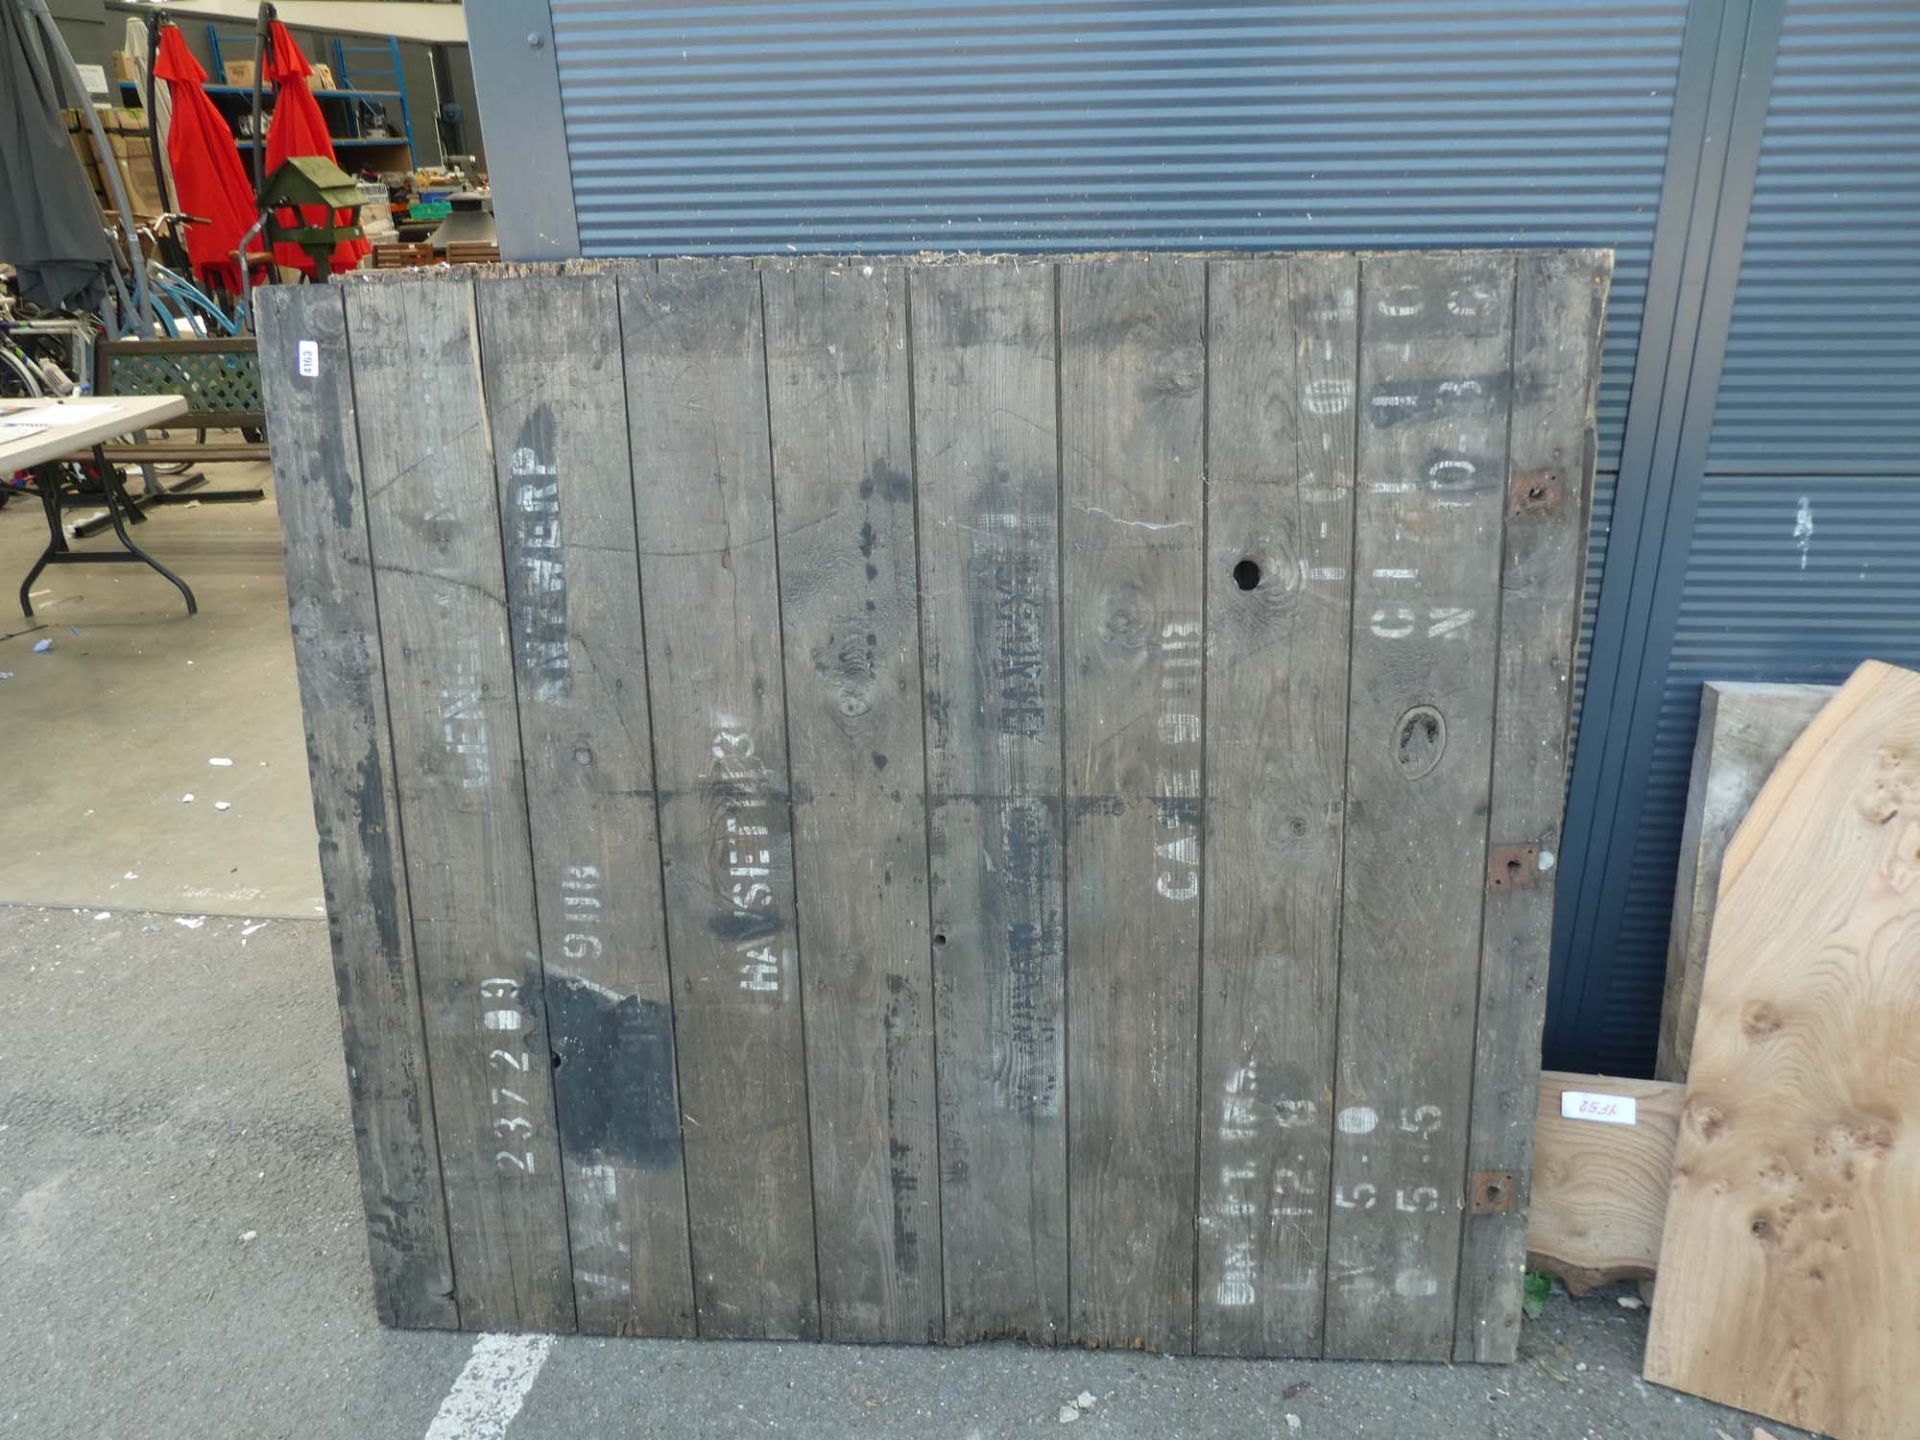 2 vintage Vauxhall shipping crate panels